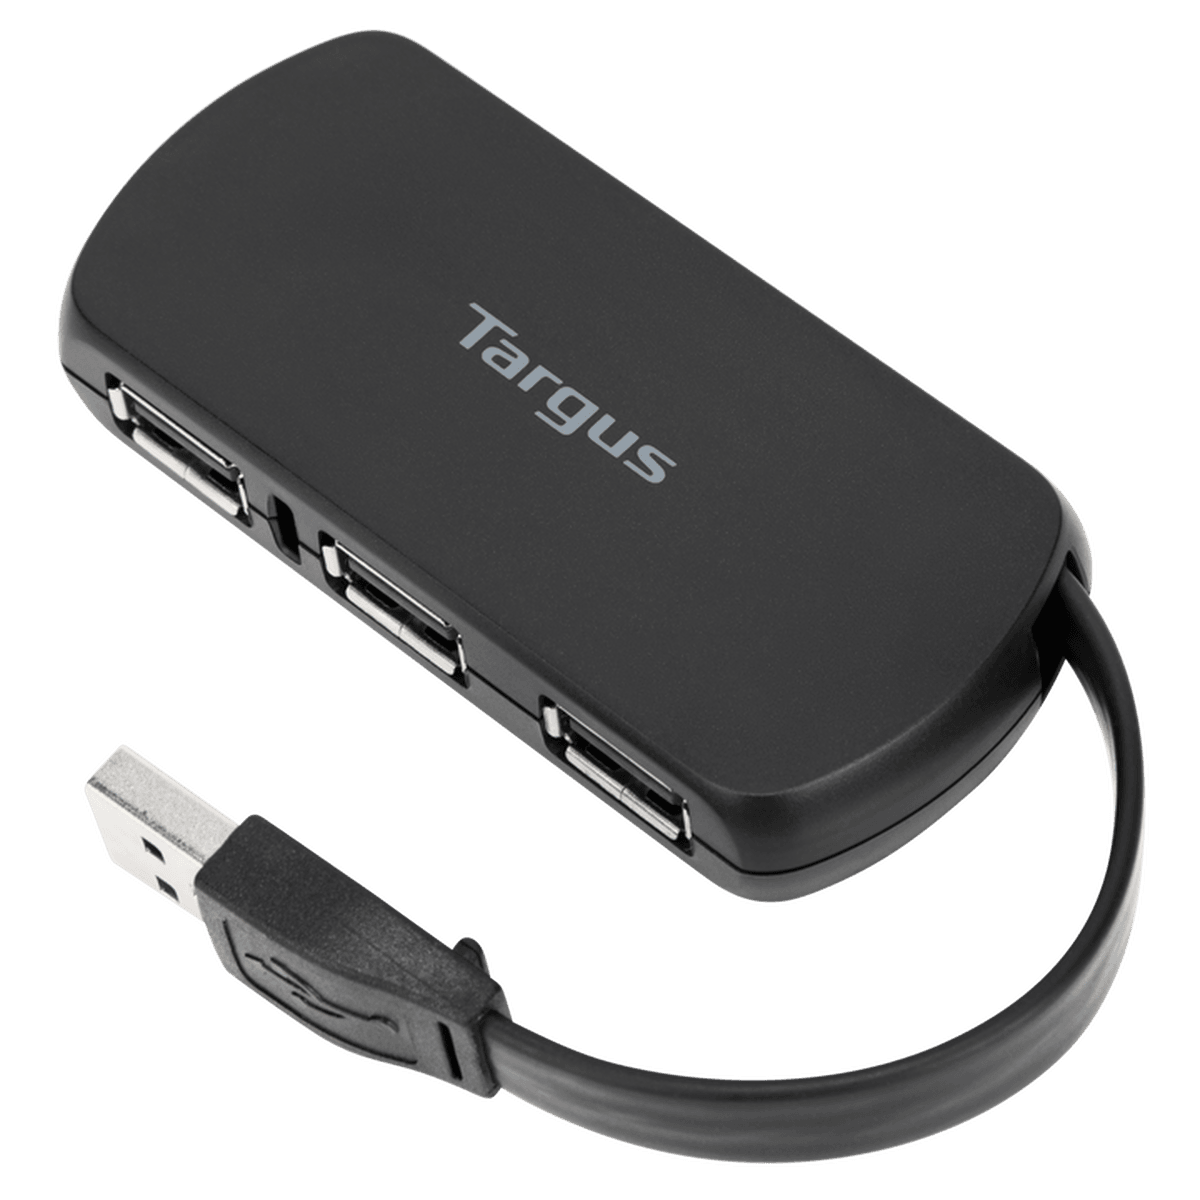 Lav vej henvise Foto 4-Port USB Hub | Connect & Charge up to 4 Devices | Targus